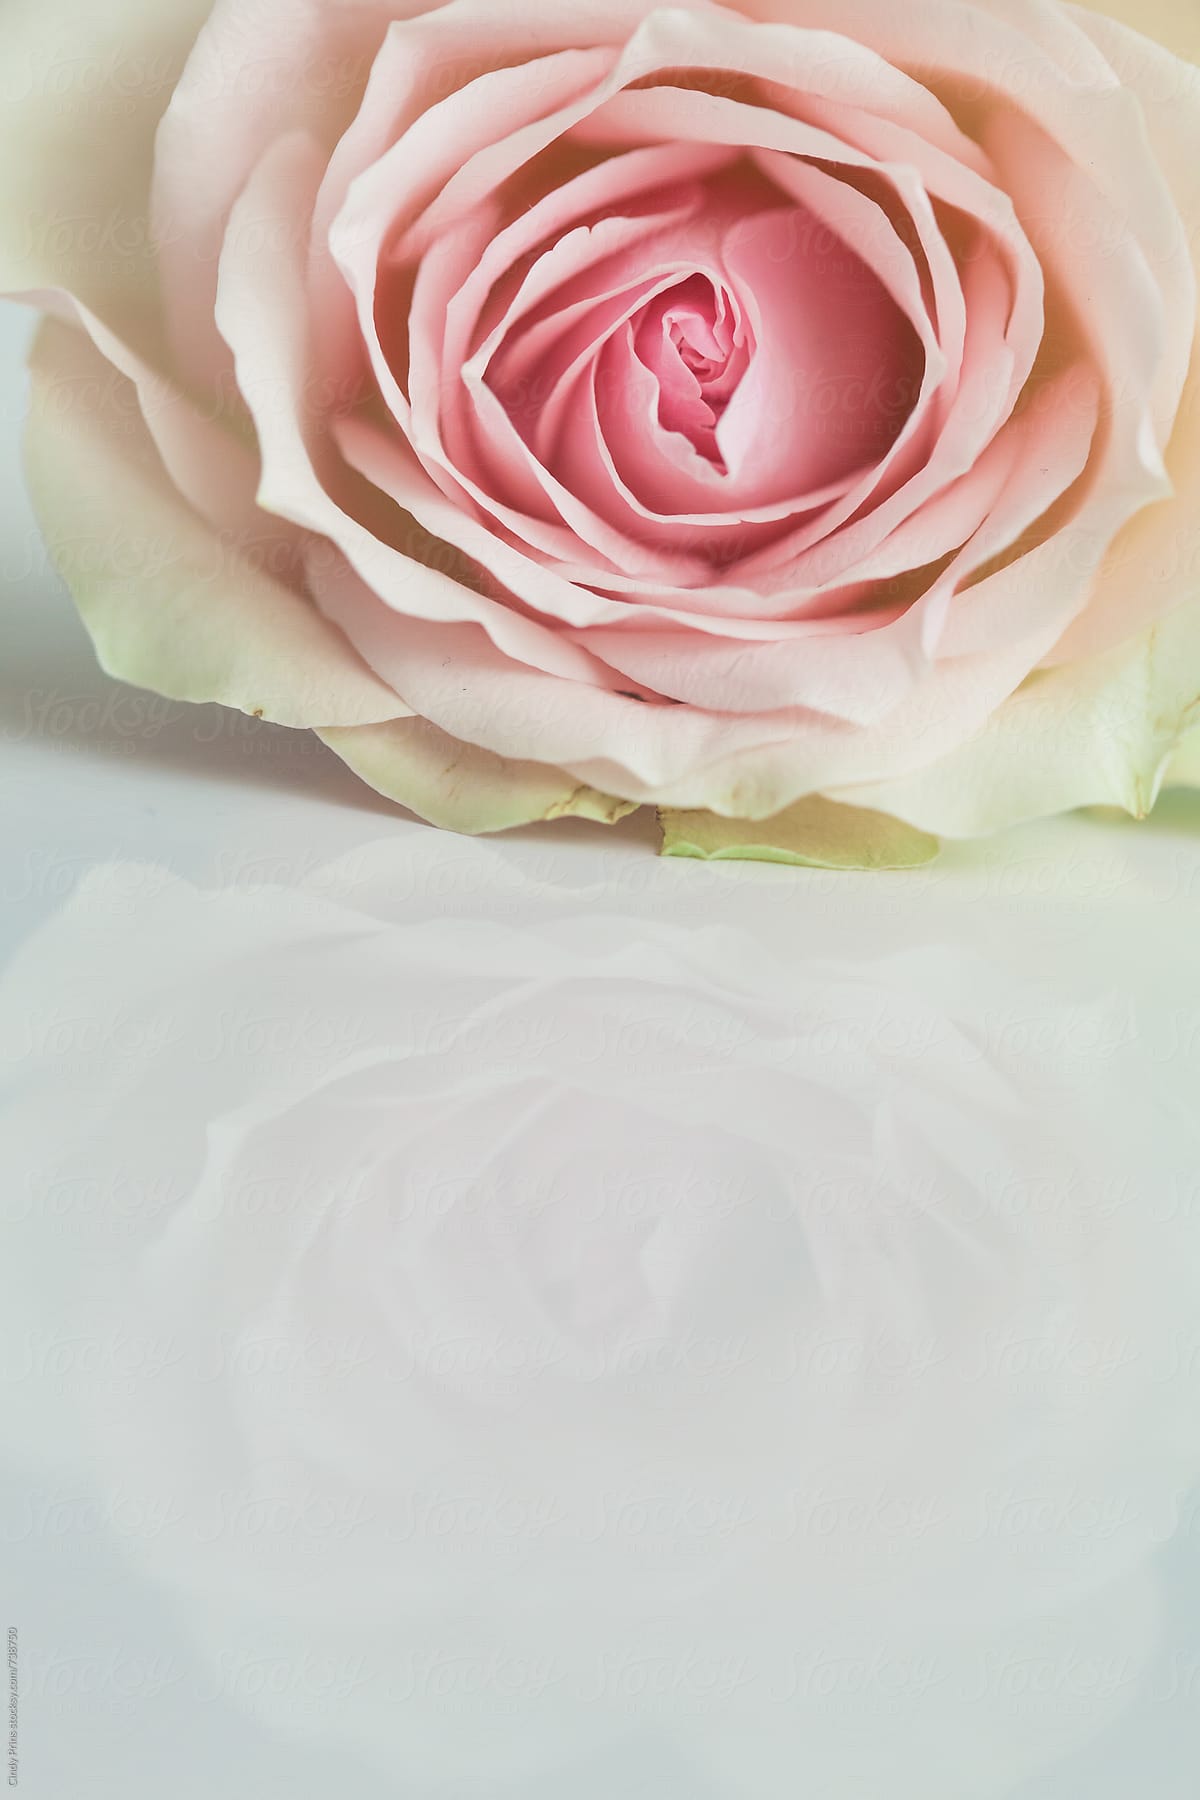 Single pink rose with a reflection on a  white table